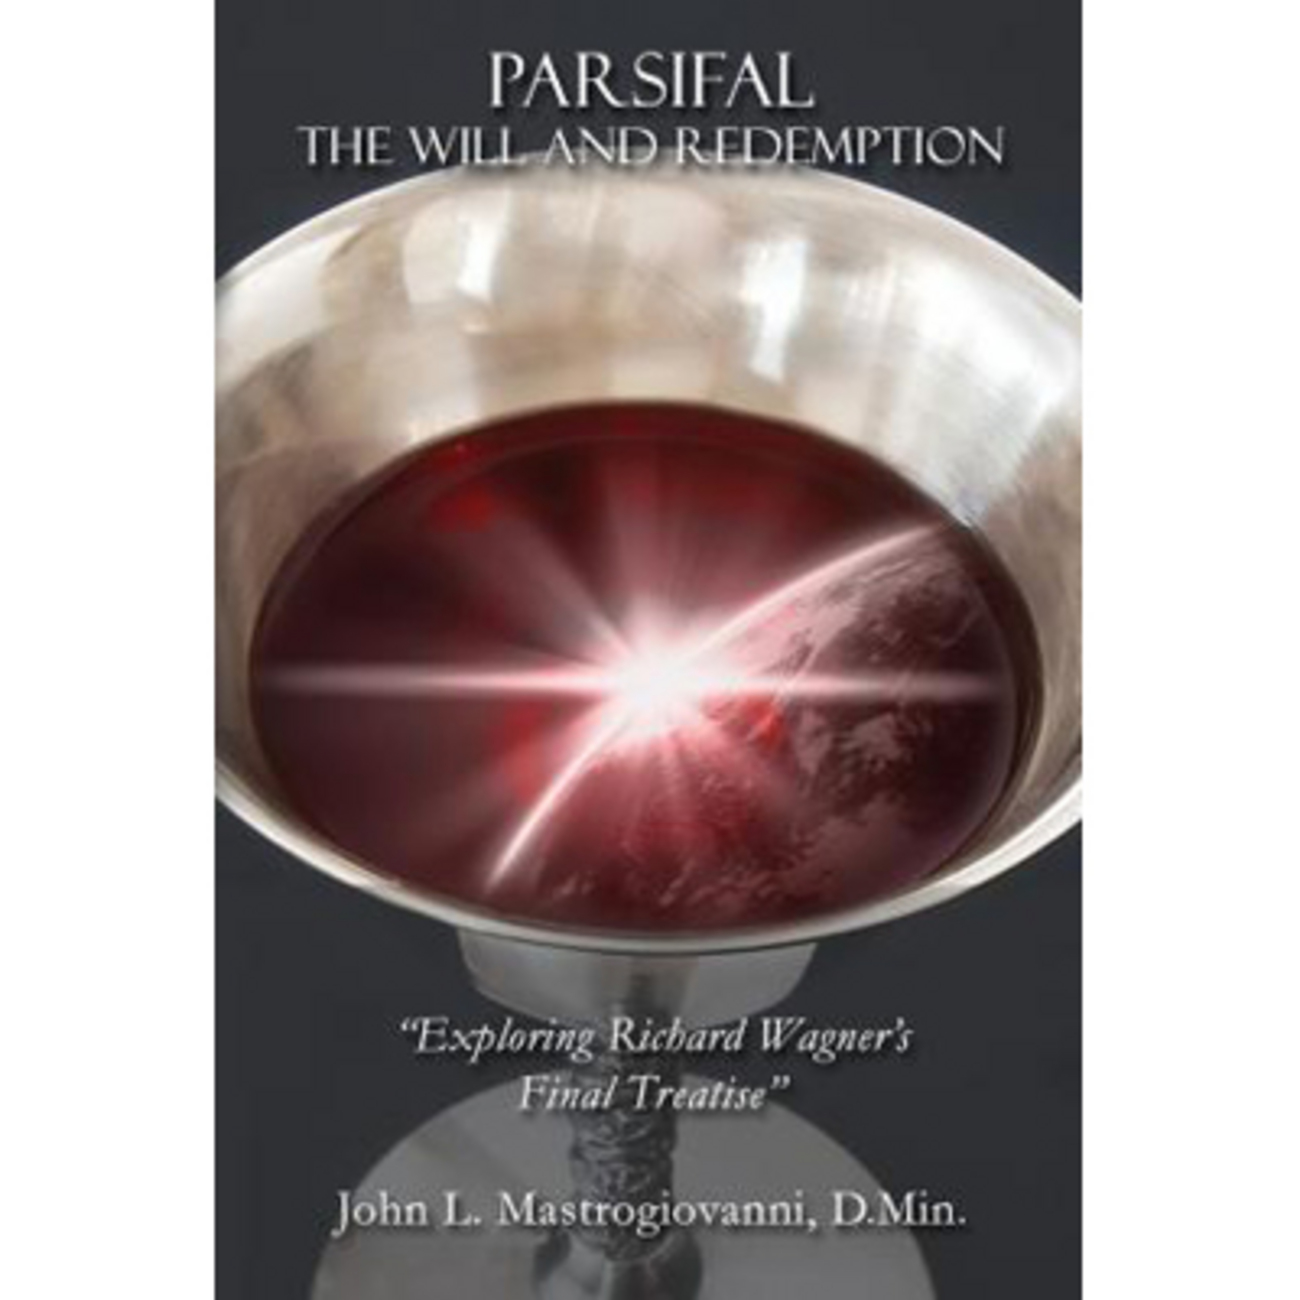 Parsifal The Will And Redemption Exploring Richard